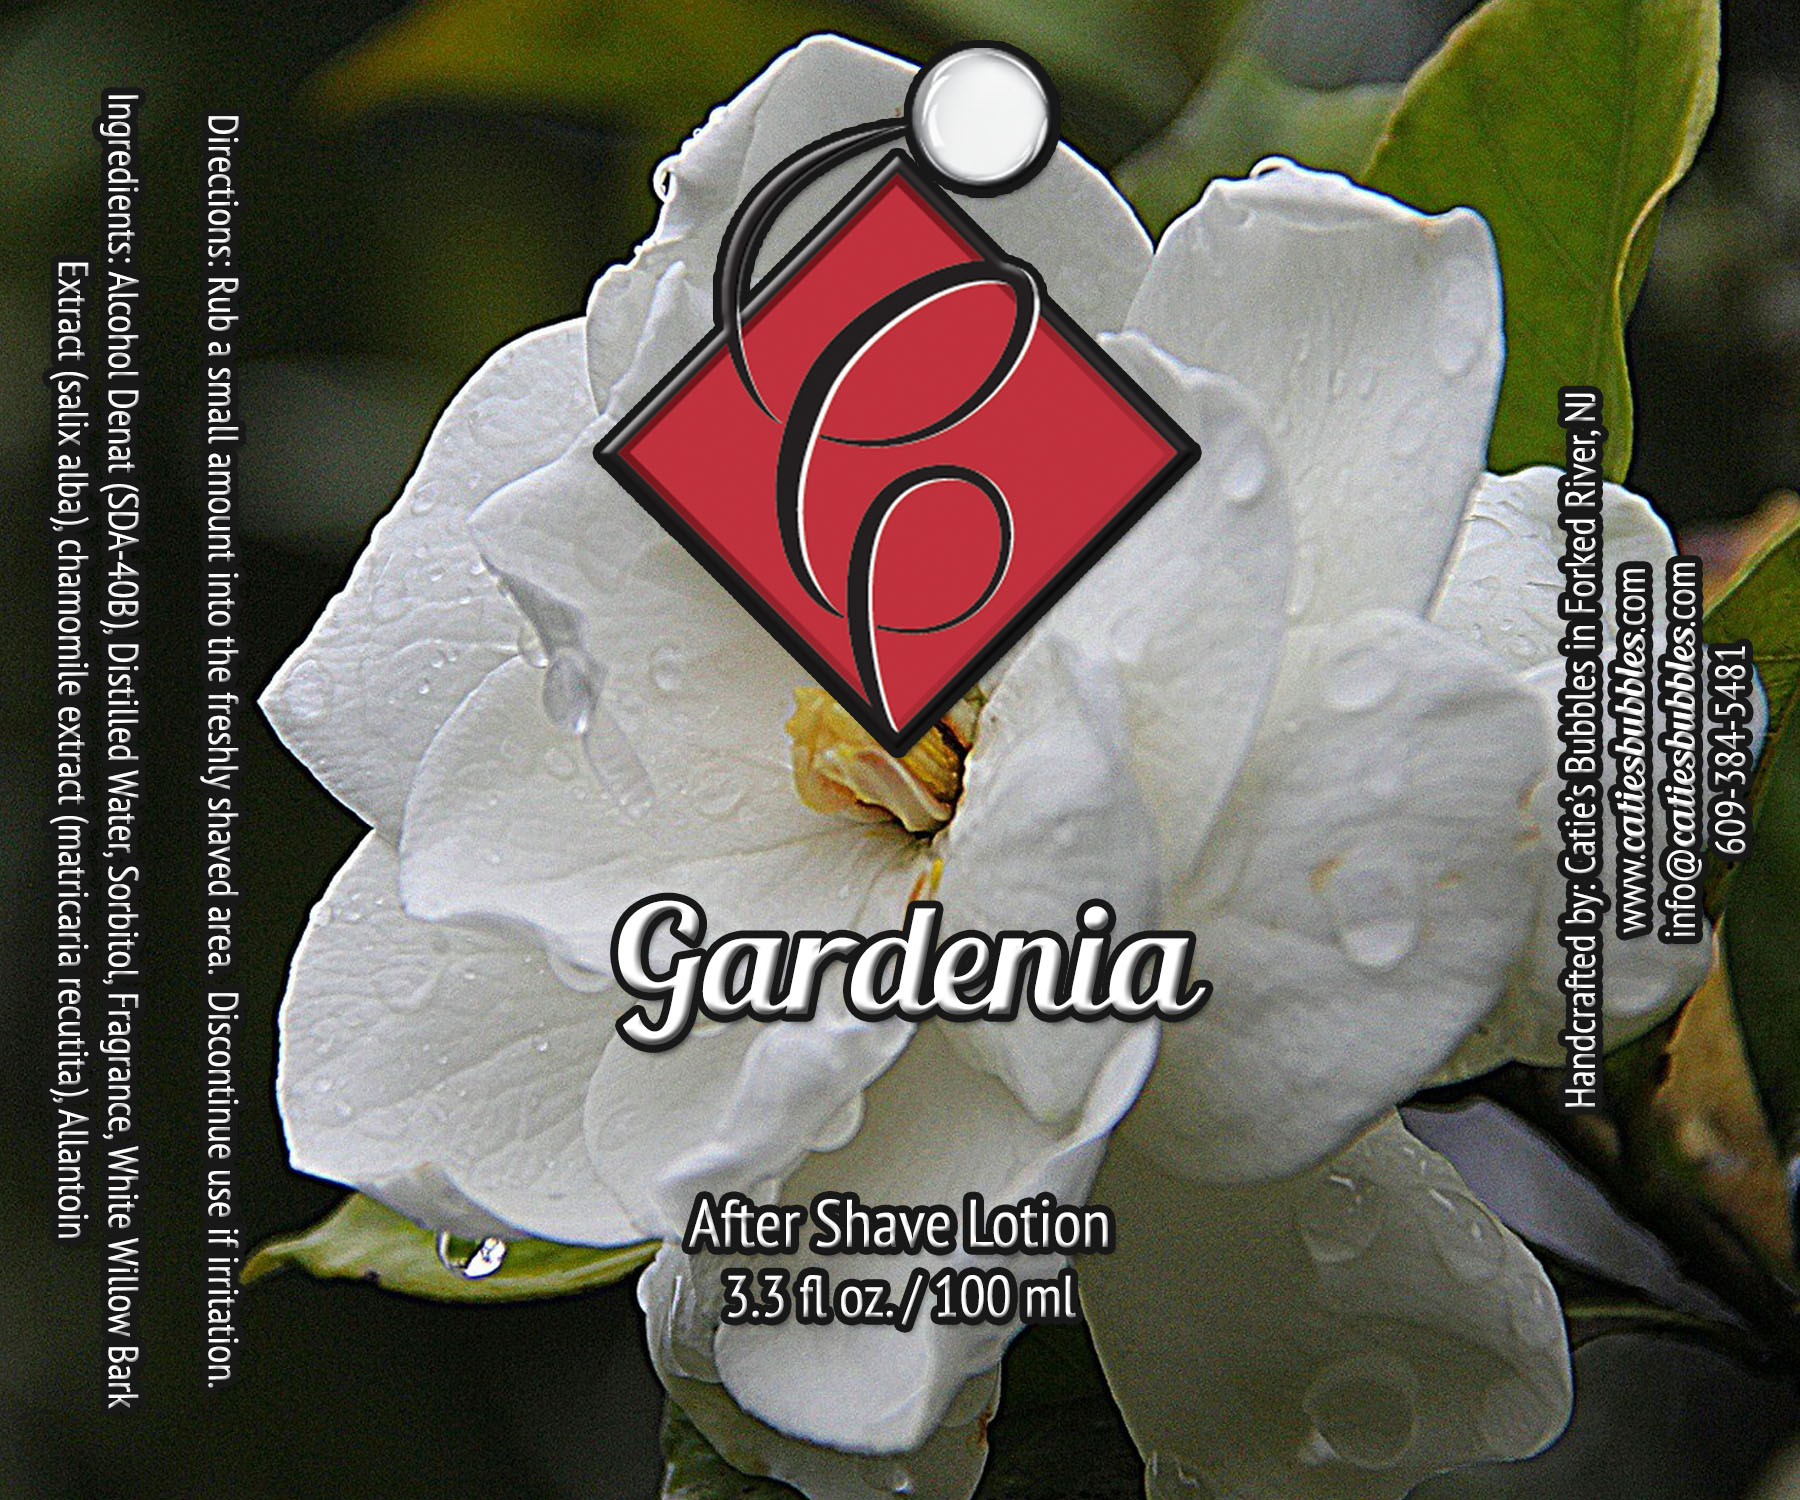 Gardenia After Shave Lotion